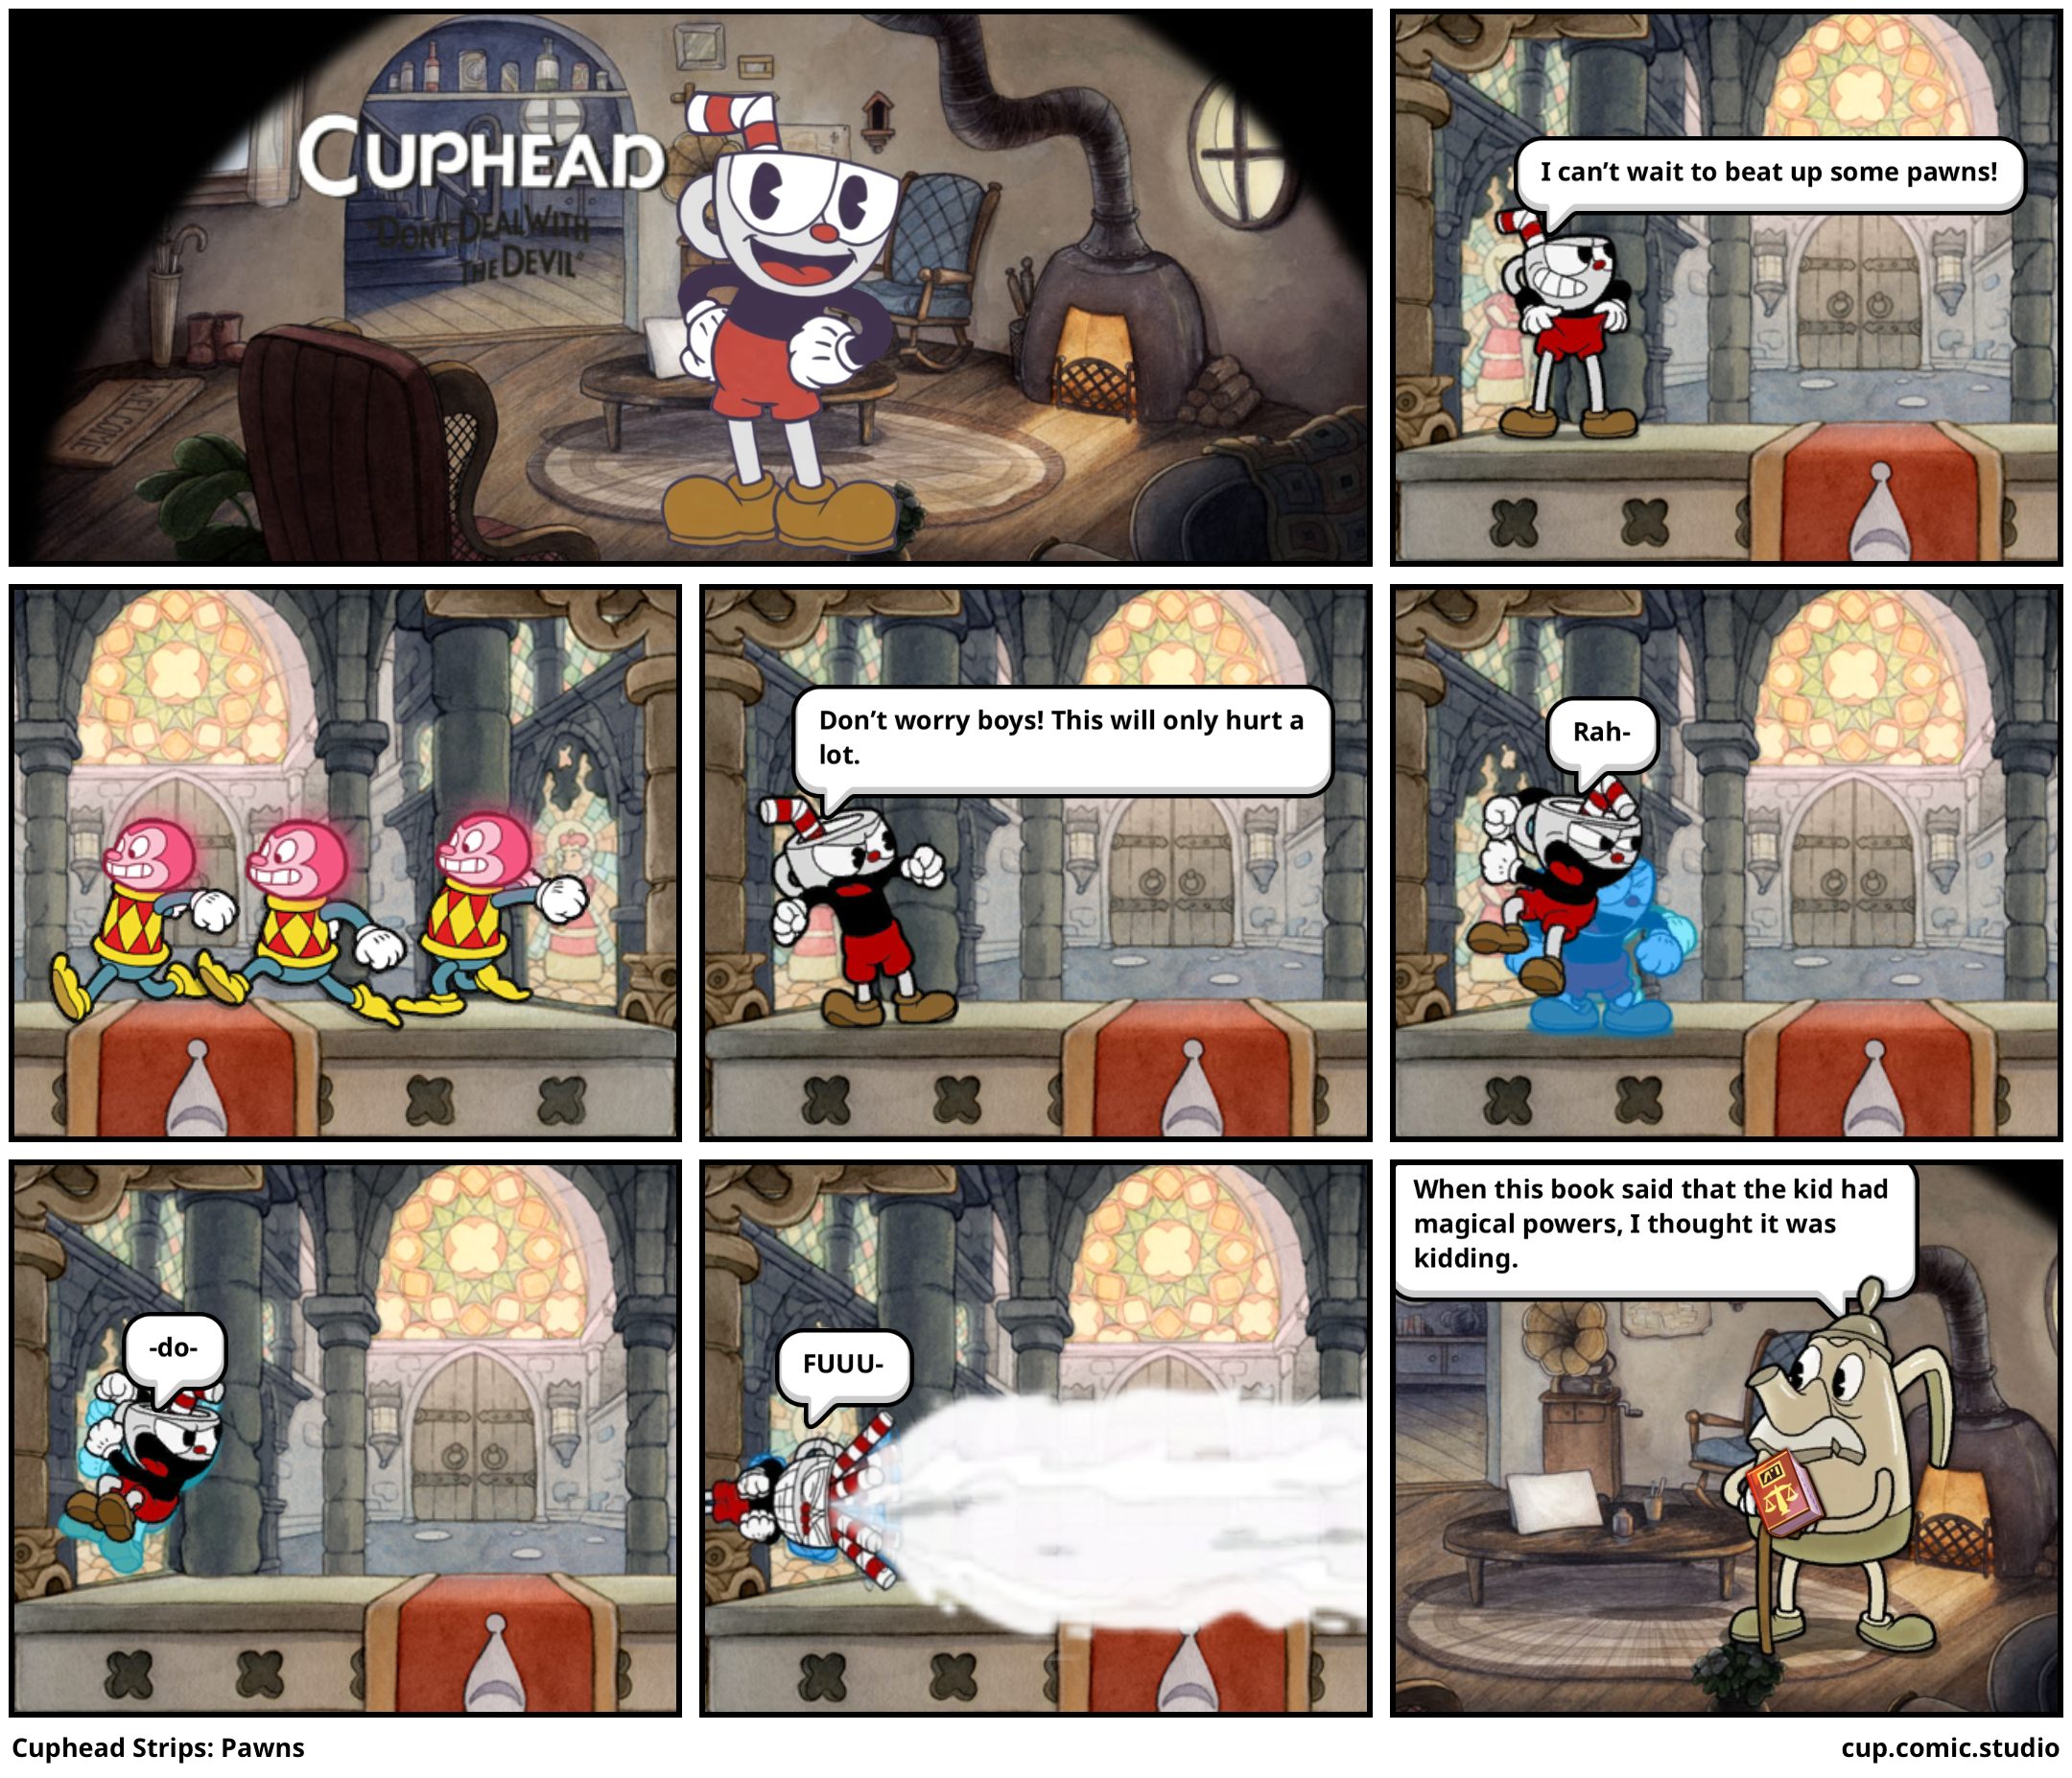 Cuphead Strips: Pawns